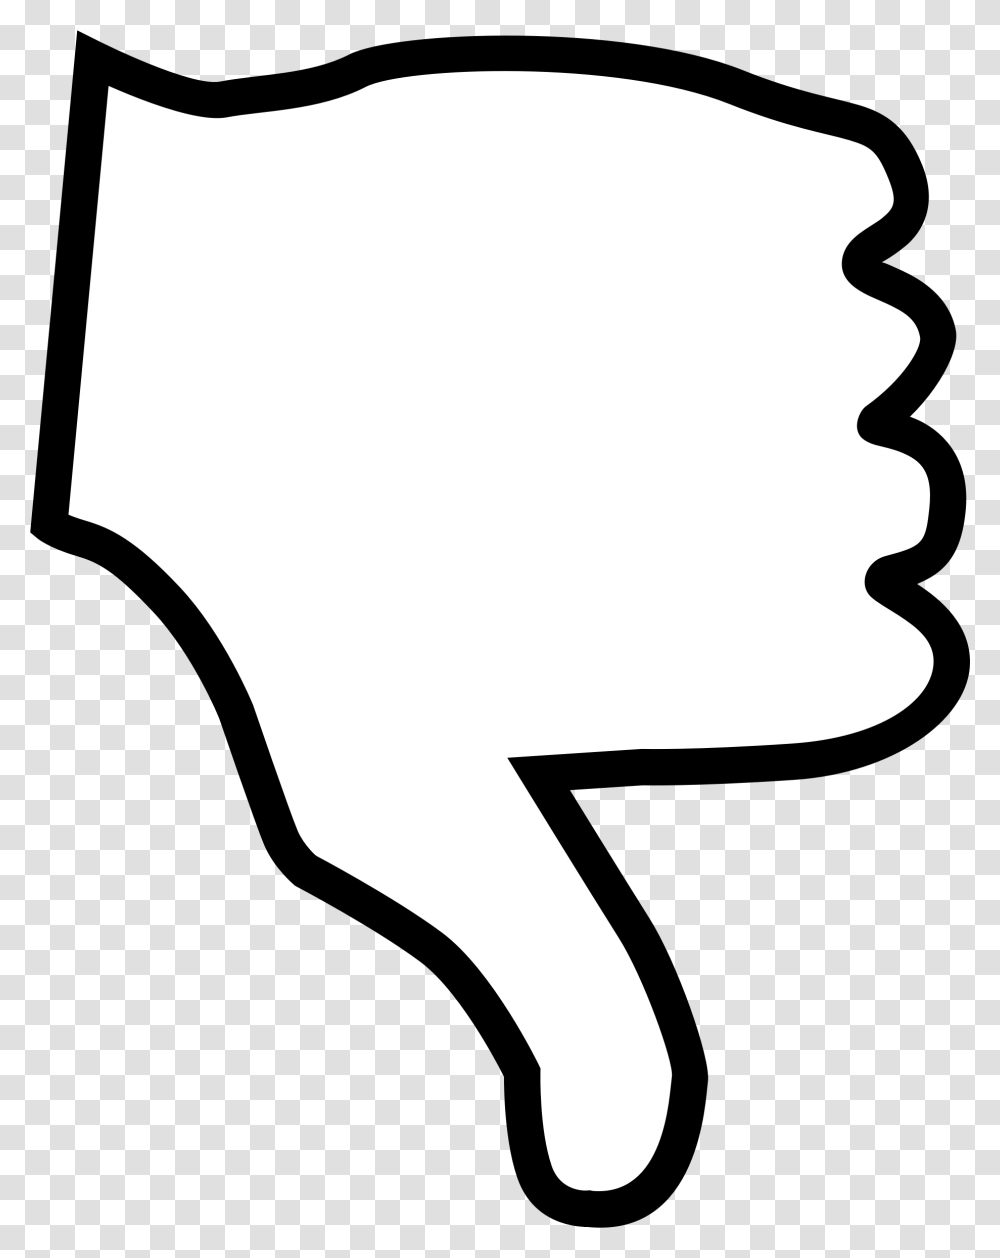 Facebook Thumbs Down Easy To Draw Thumbs Down, Silhouette, Baby, Newborn Transparent Png